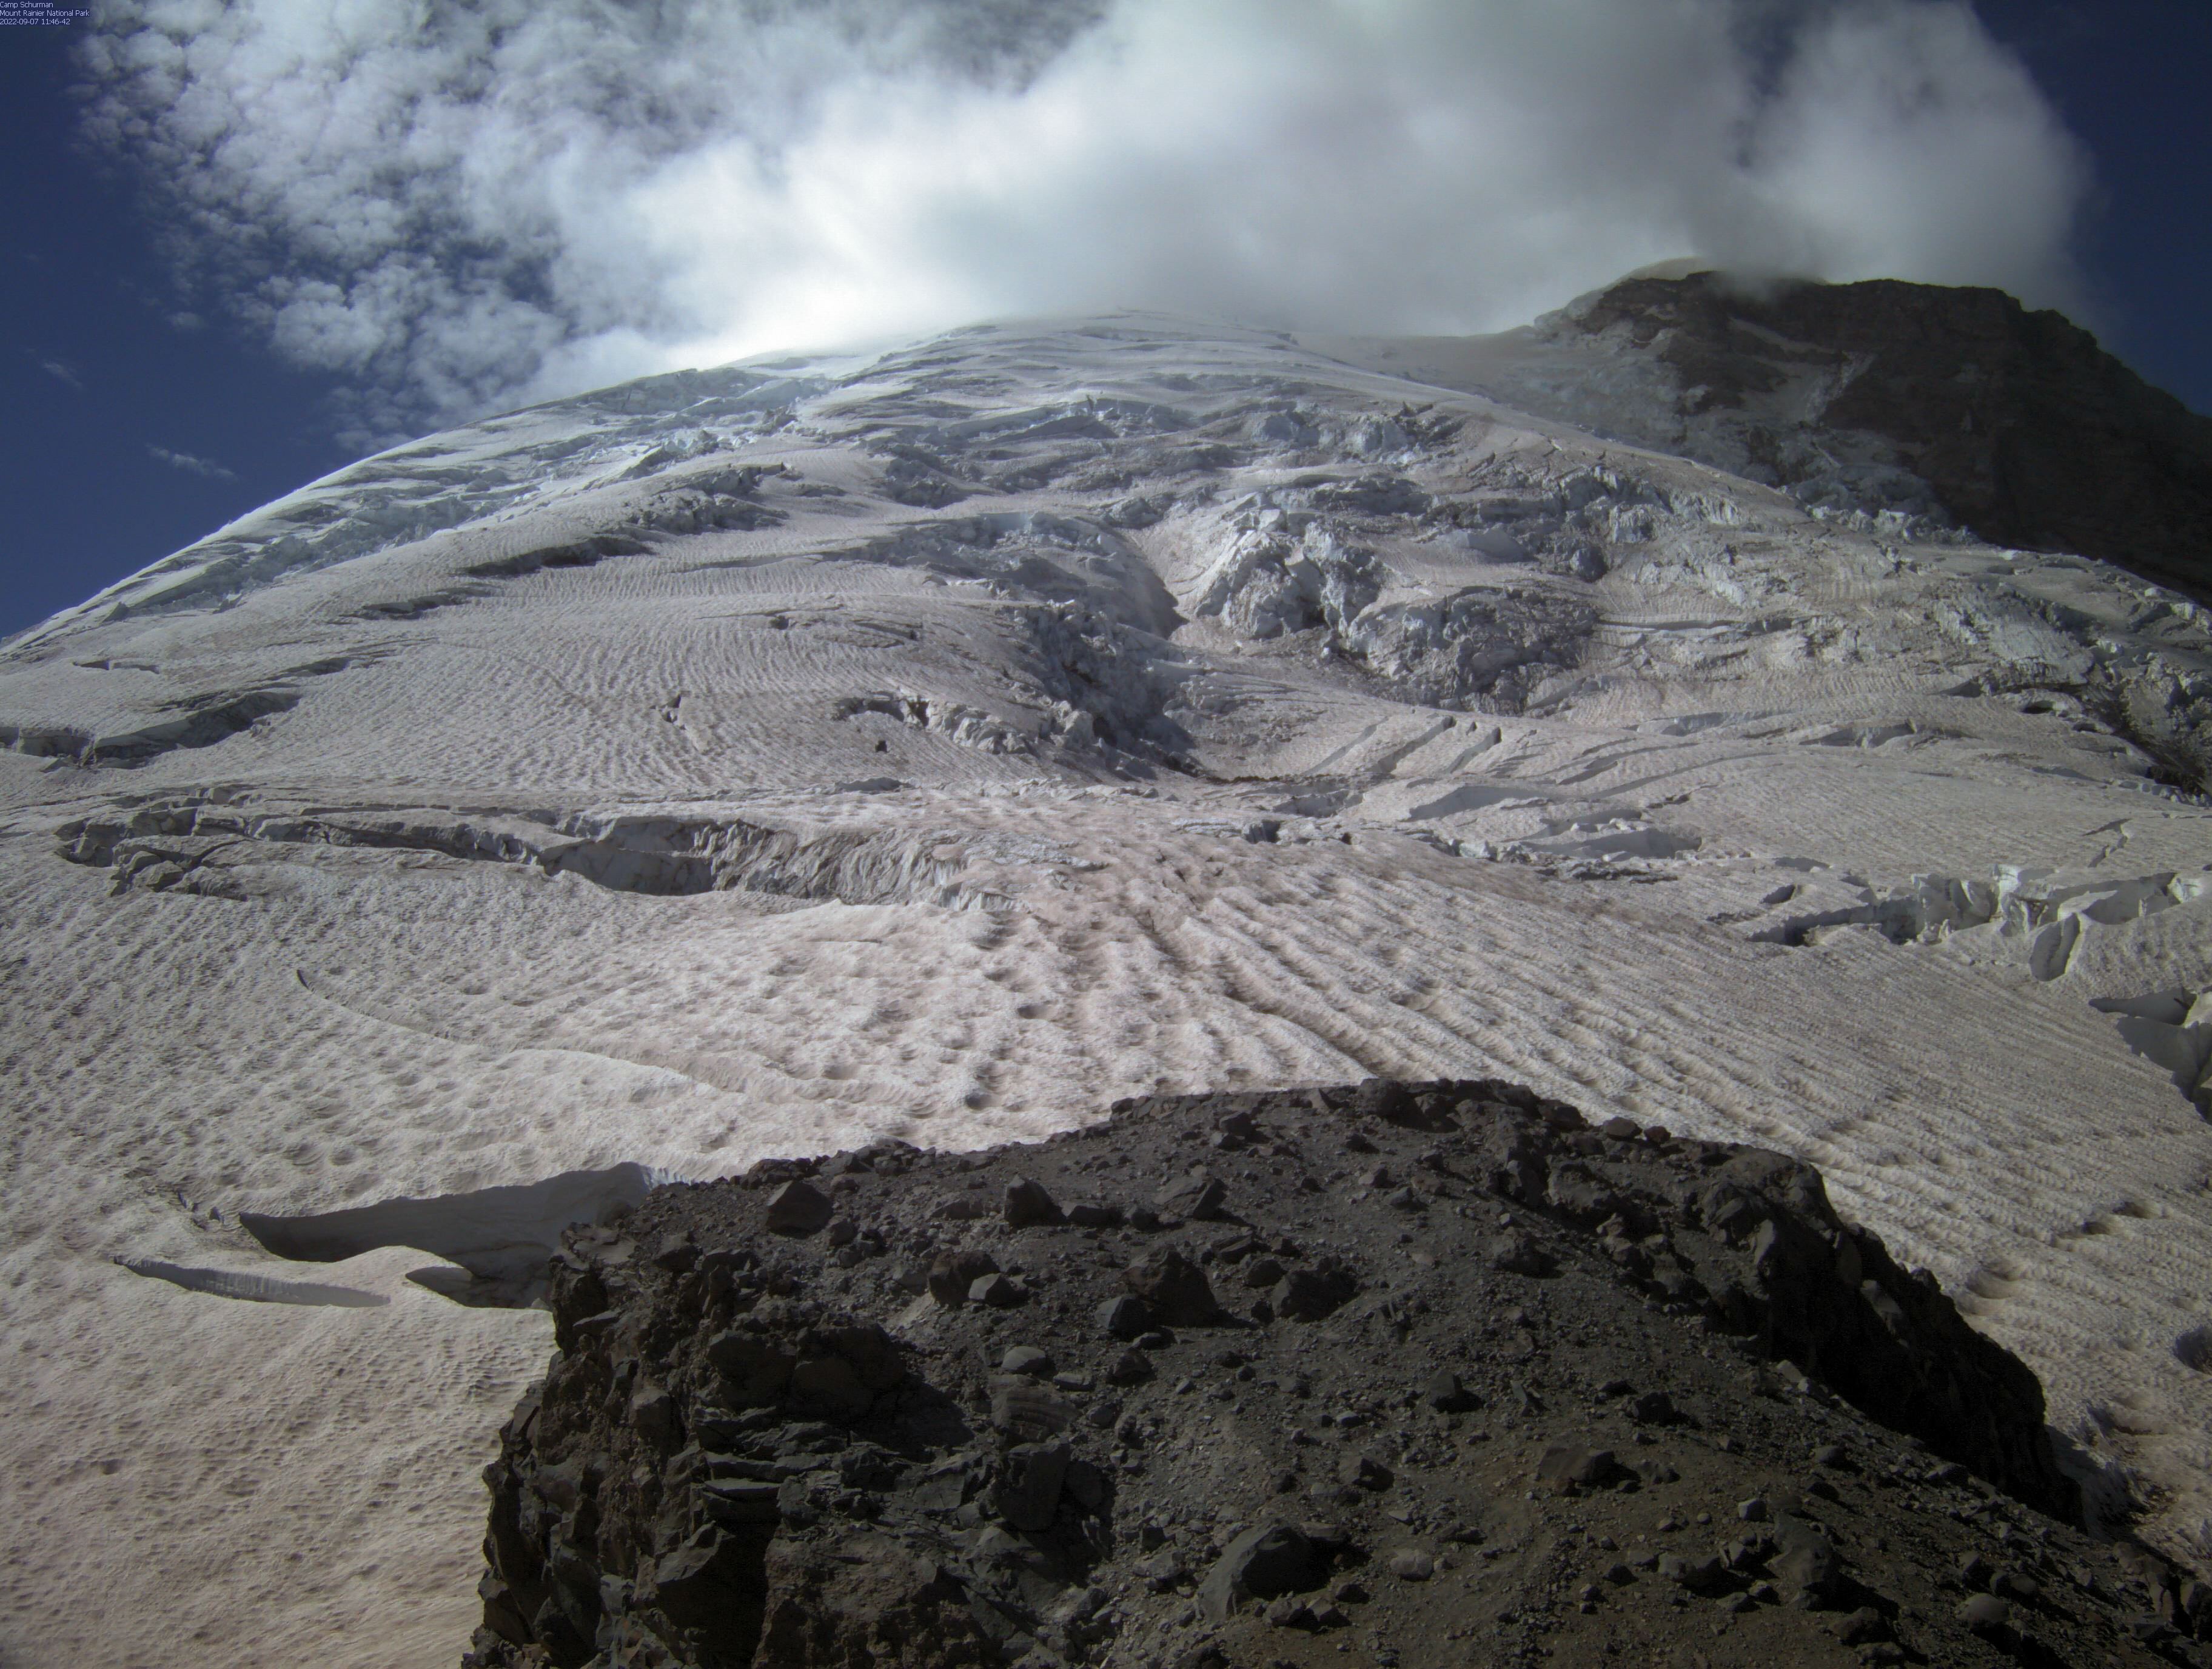 An icy mount slope with a cloud formation above.